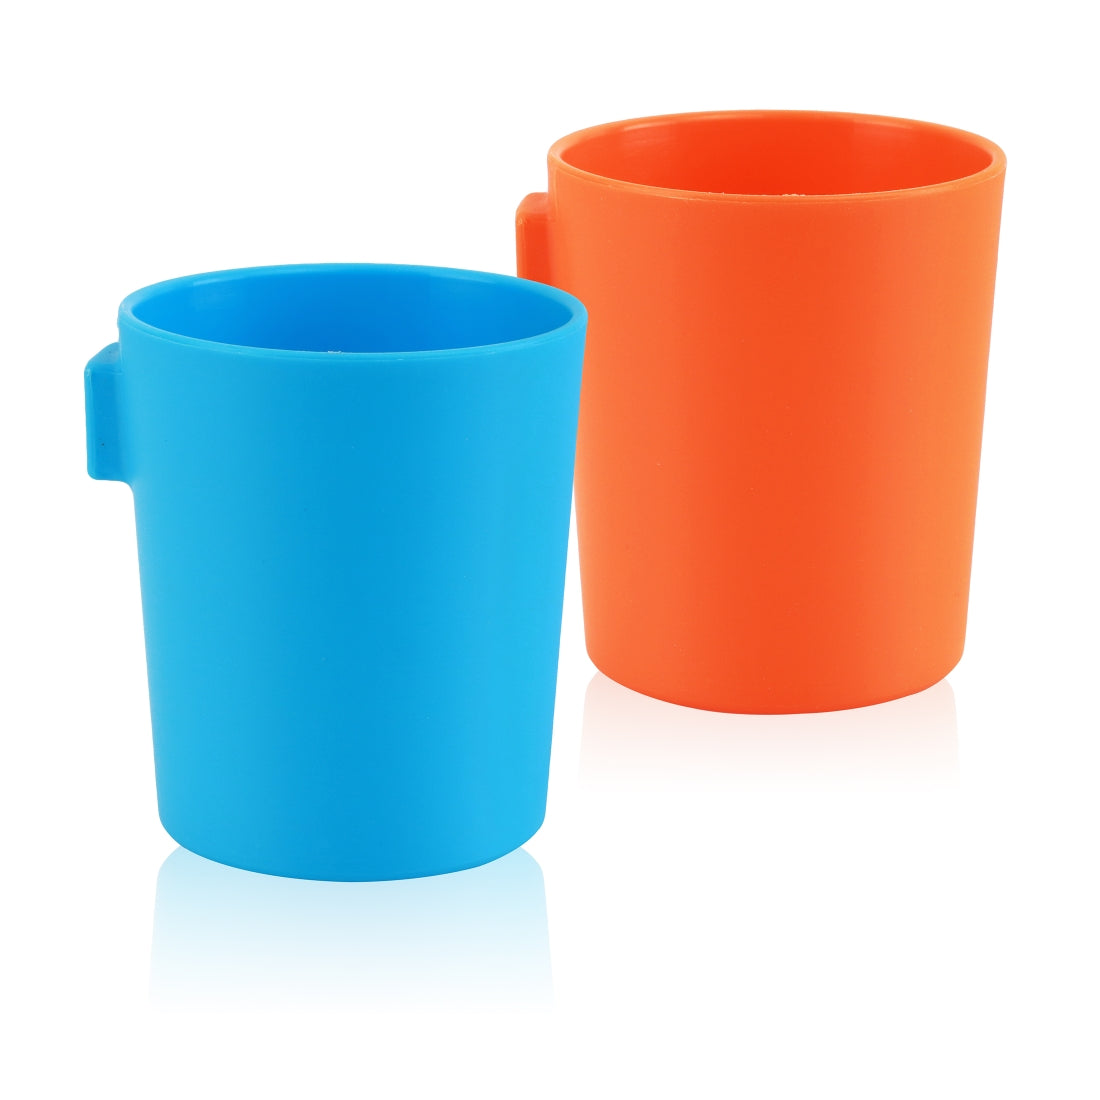 Ez-Cup Magnetic Hanging Cups 2 pk